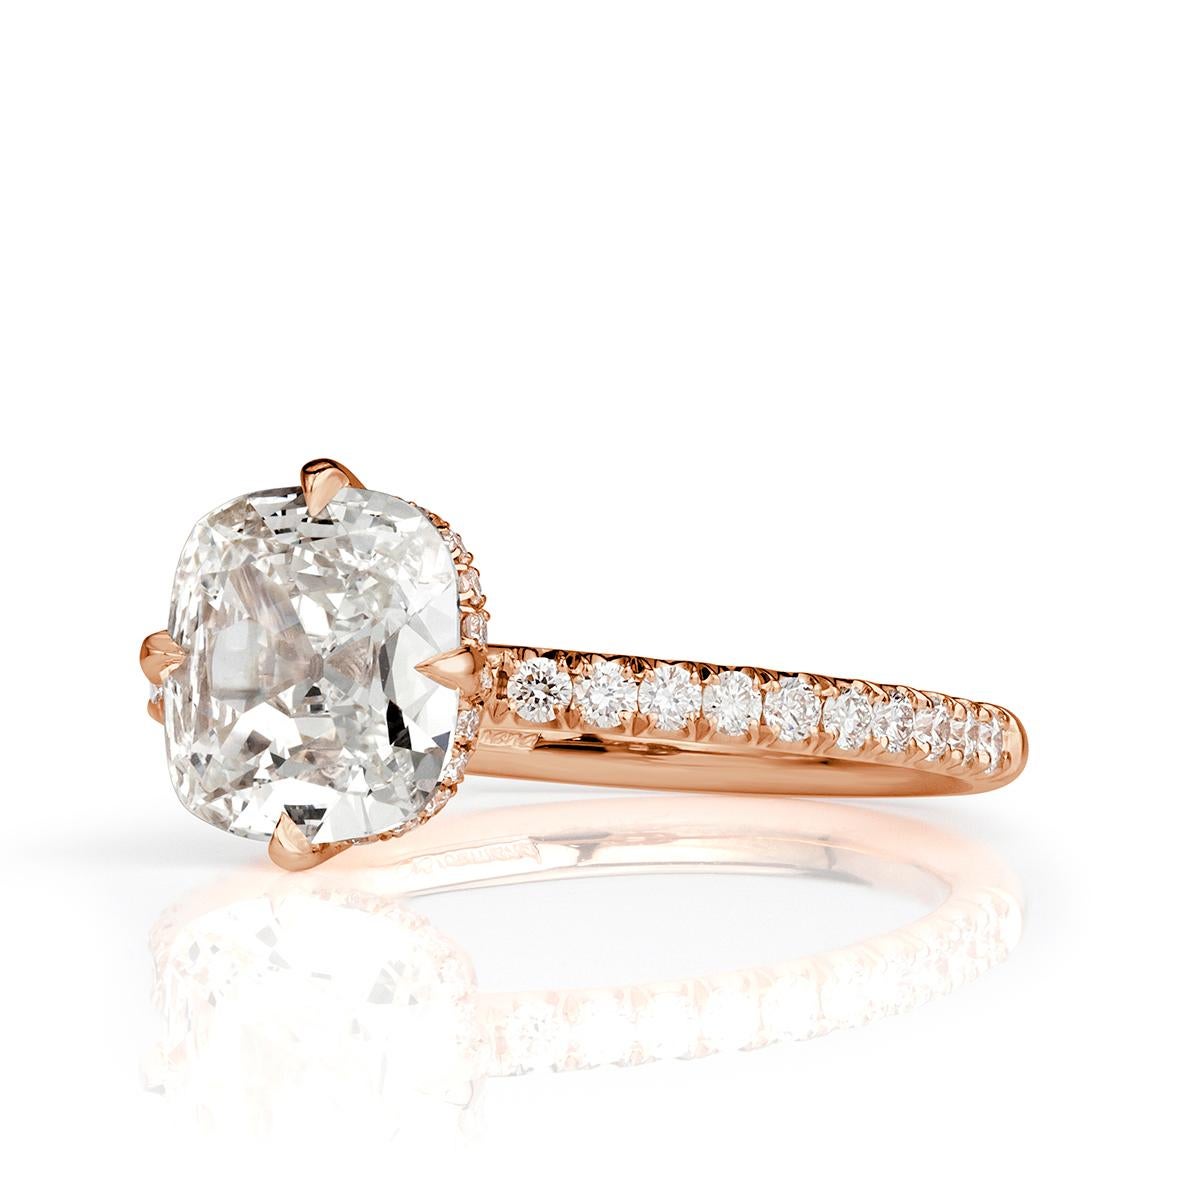 This stunning diamond engagement ring showcases a gorgeous 2.08ct old mine cut center diamond, GIA certified at I in color, SI2 in clarity. It is showcased to perfection in our custom 18k rose gold north-south-east-west setting style. It is accented